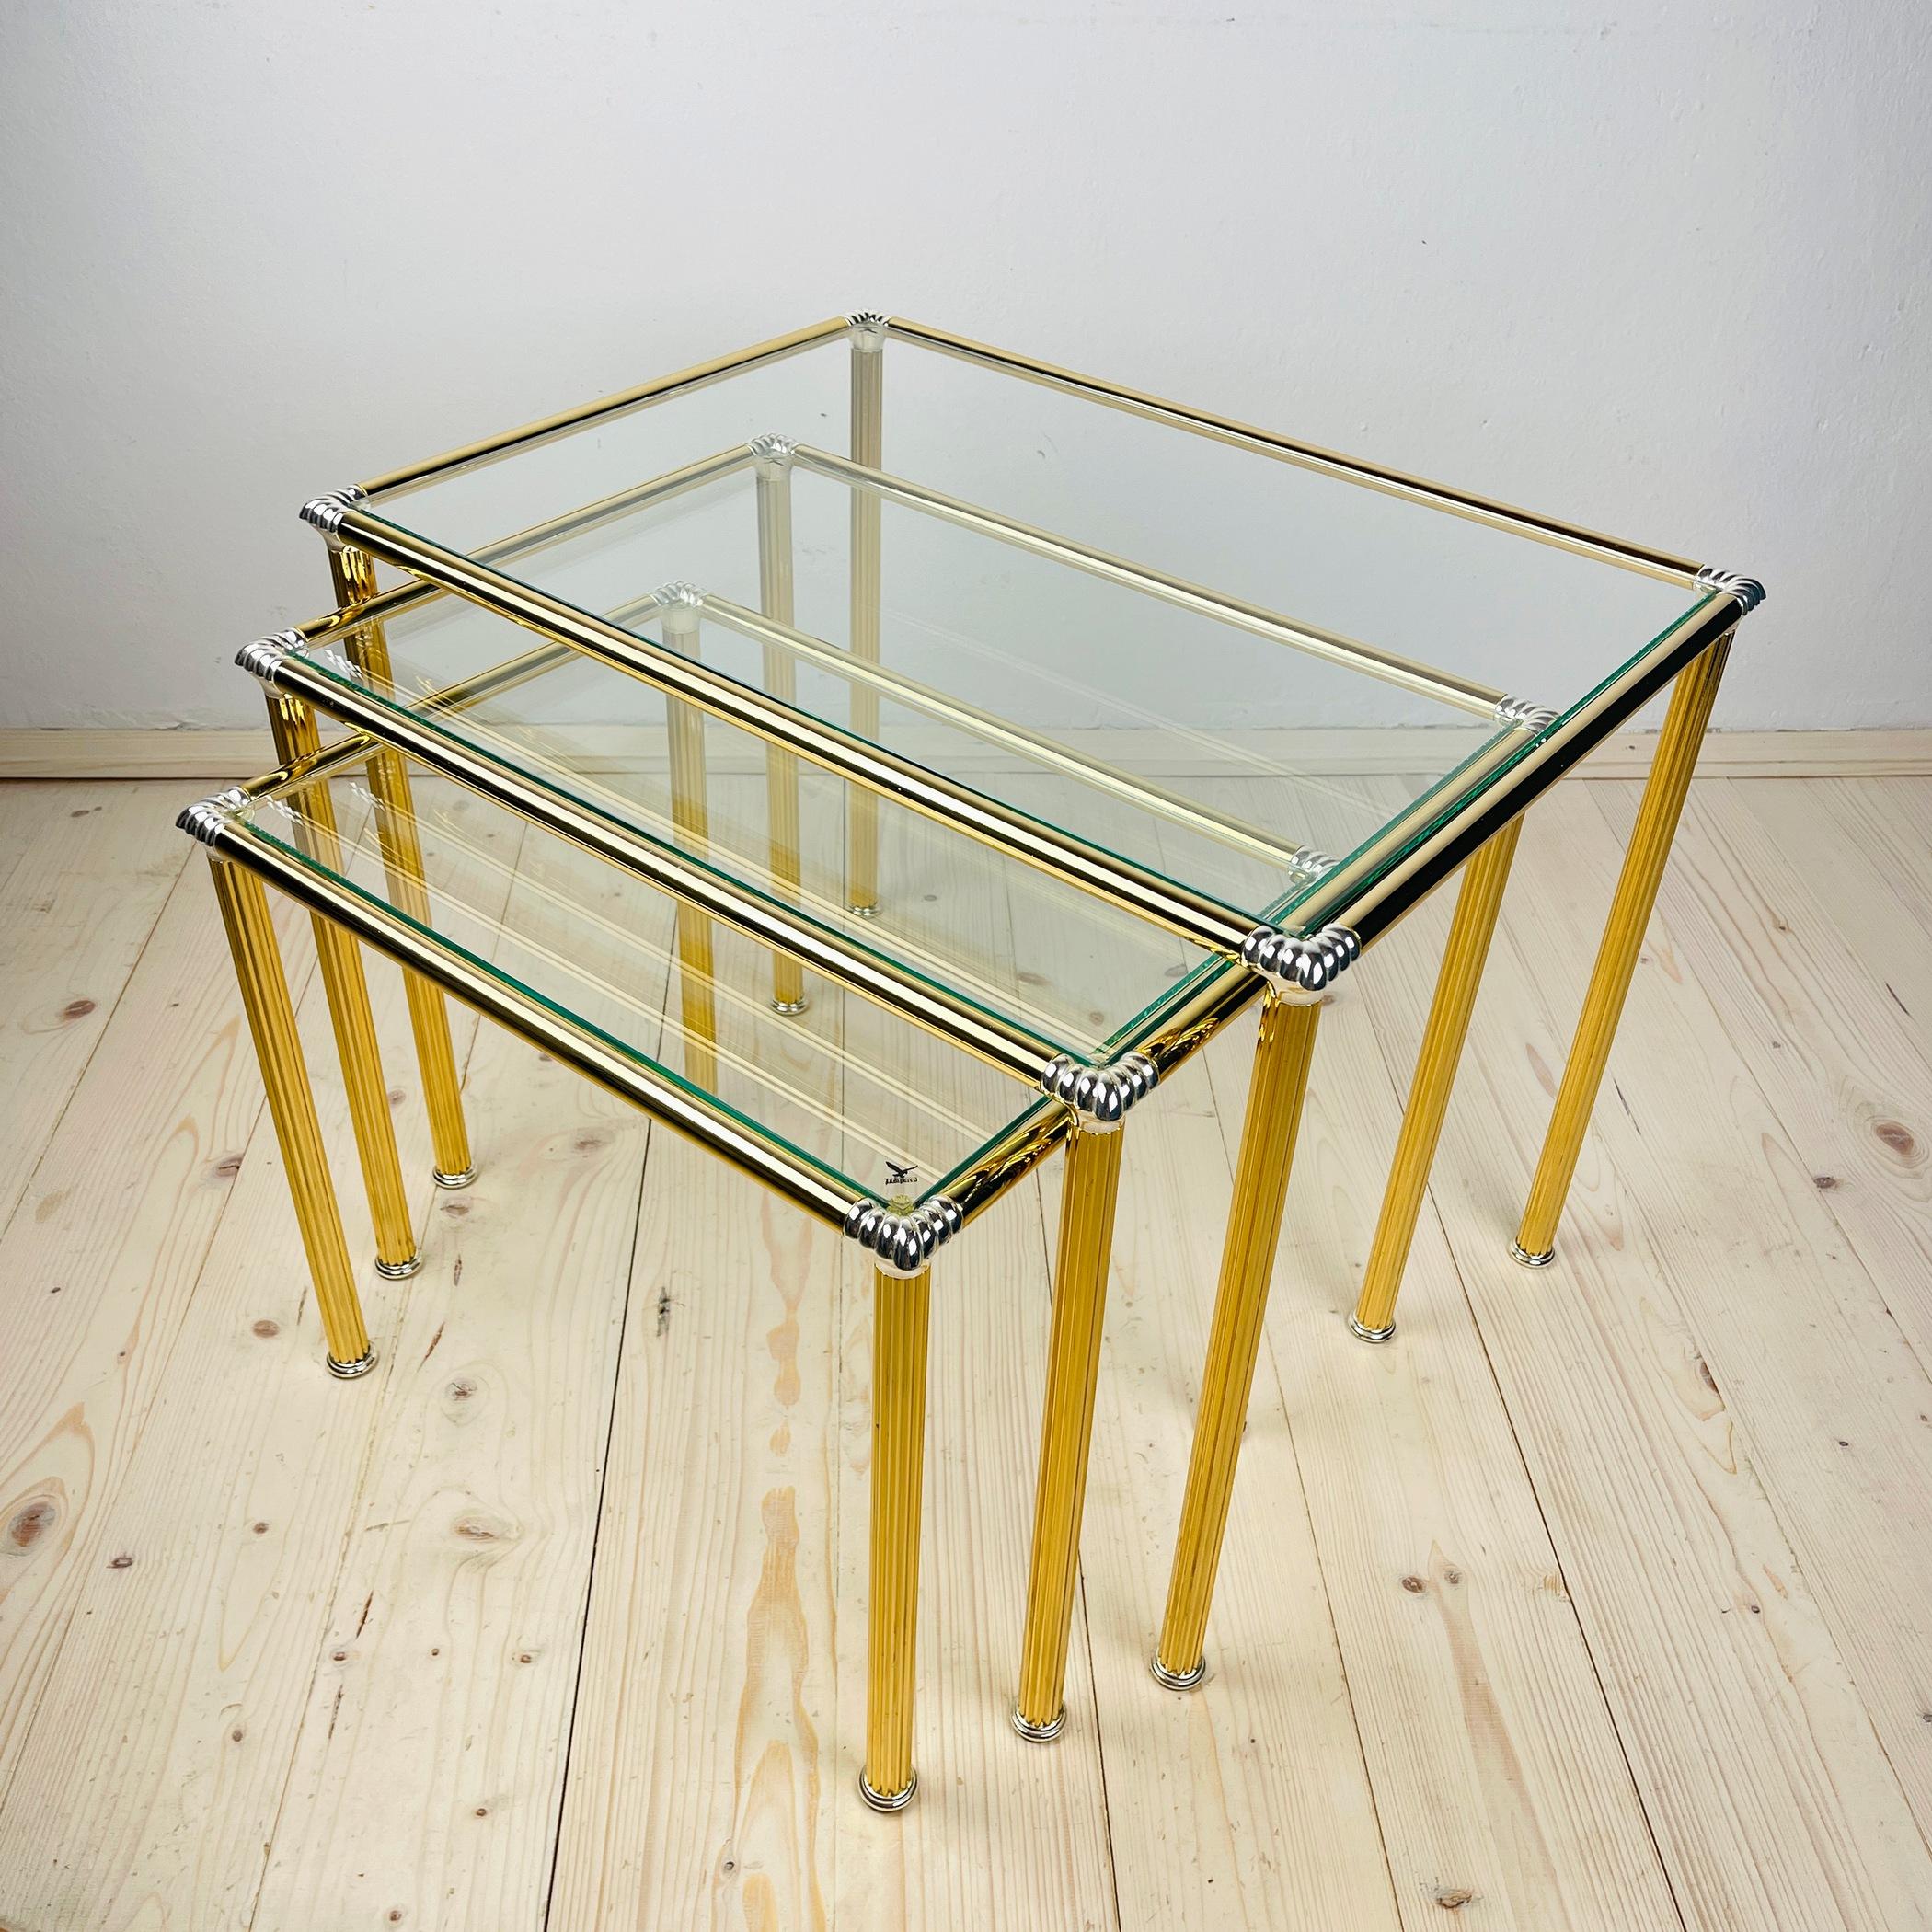 Introducing an exquisite set of 3 Italian vintage design golden nesting tables, each adorned with a beautifully glass top. Crafted to nestle within one another, these tables not only exude modern elegance but also offer practical space-saving